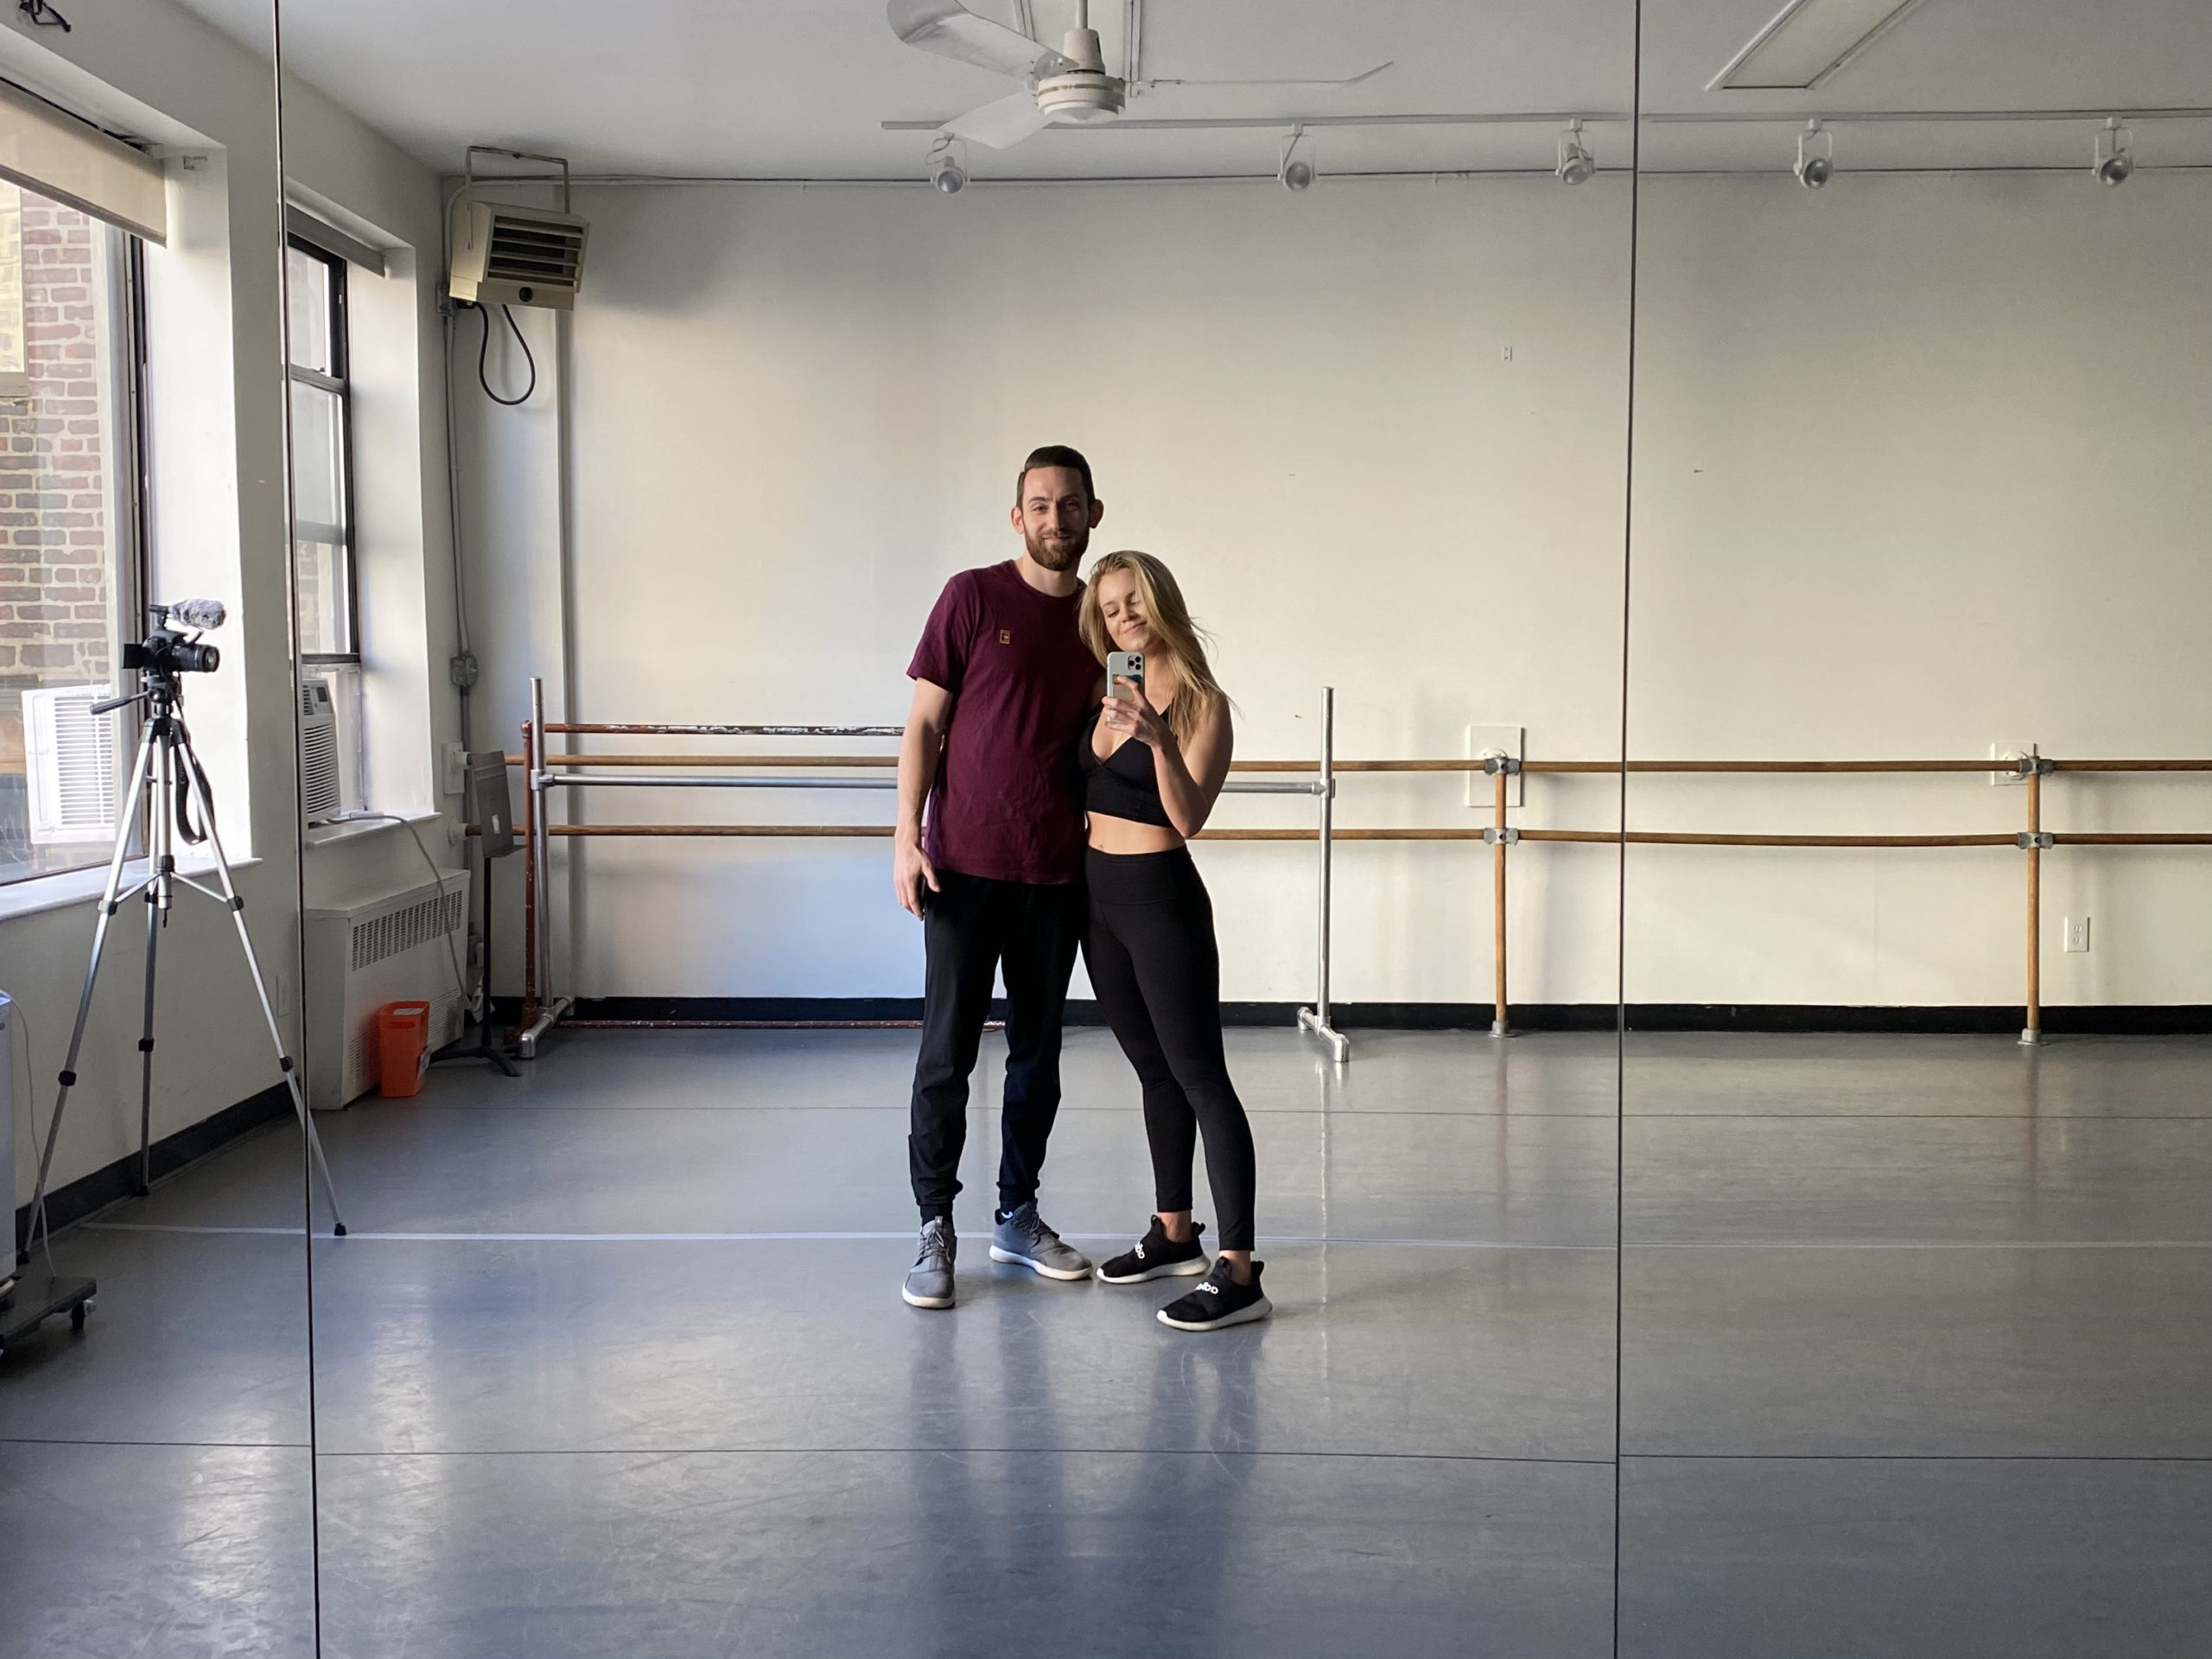 Haley Hilton wears black leggings and tank top, and her husband Coleman Clyde wears a loose maroon short-sleeved T-shirt and dark pants. They have an arm around each other and are taking a selfie in a dance studio, with ballet barres in the background.